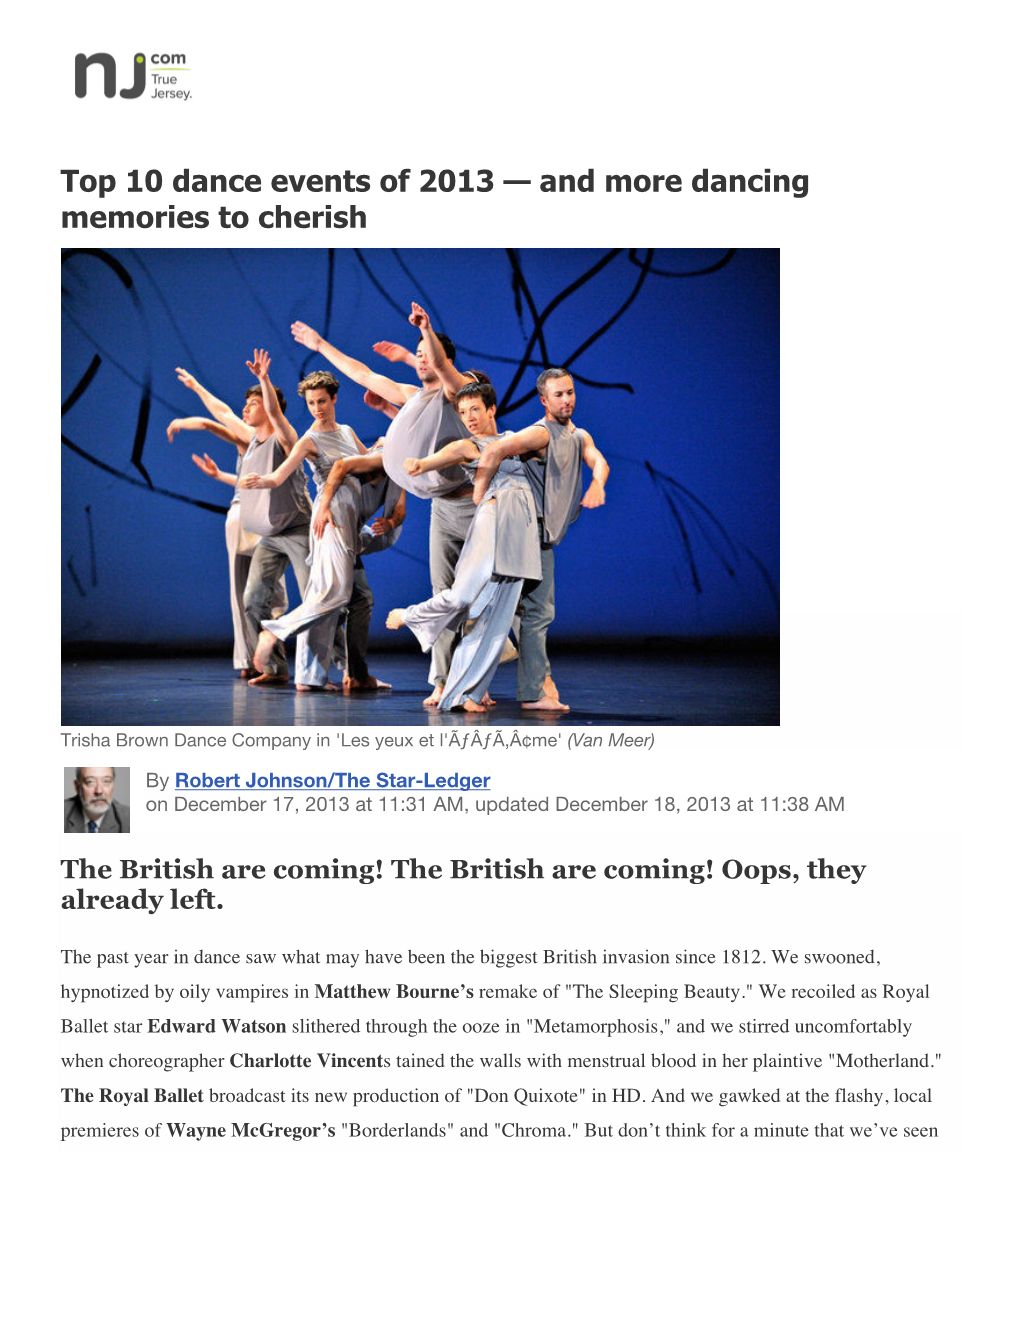 Top 10 Dance Events of 2013 — and More Dancing Memories to Cherish